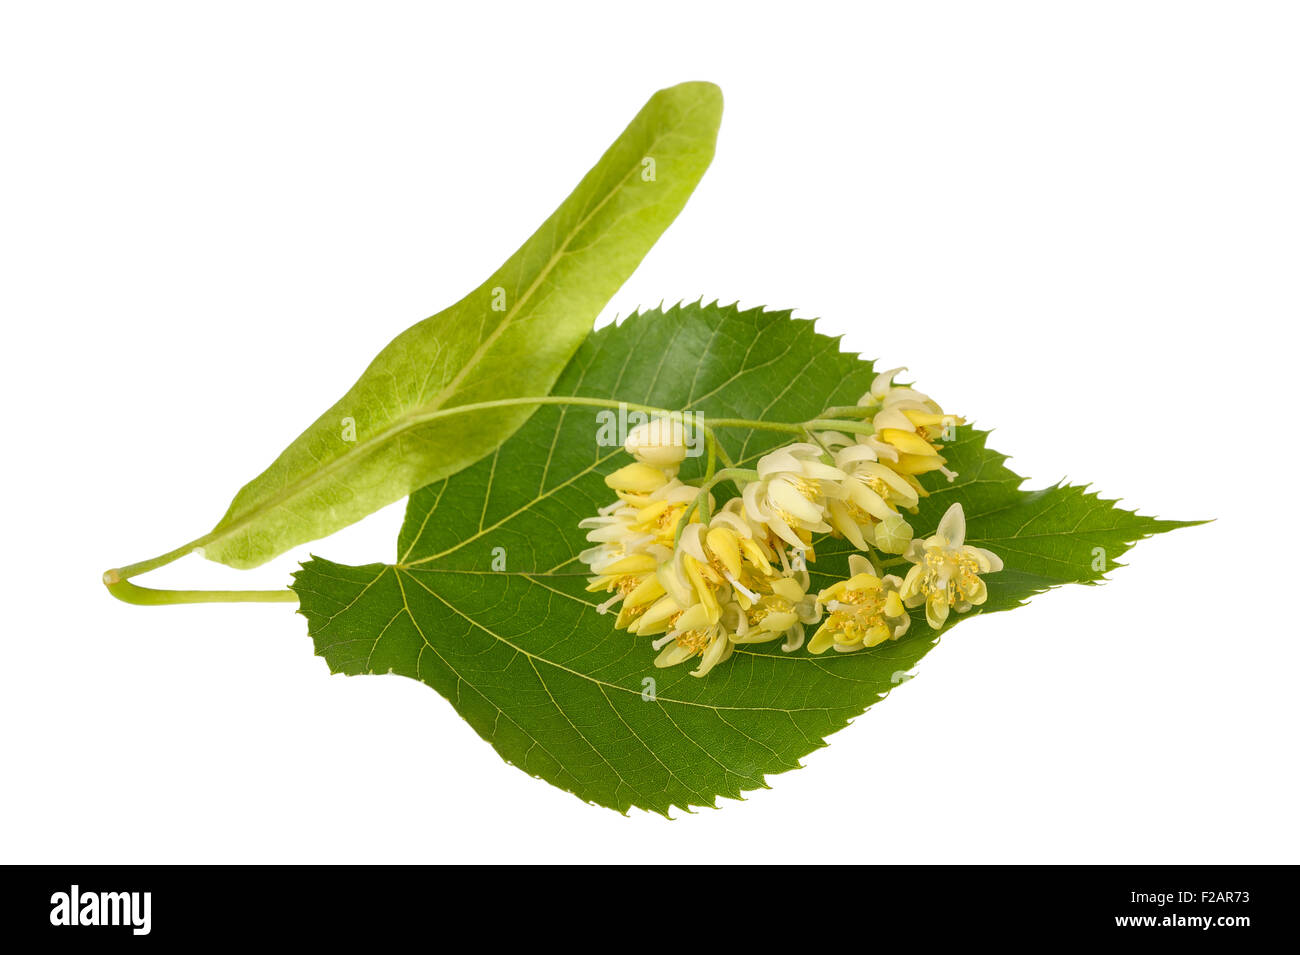 linden leaf with flowers isolated on white background Stock Photo